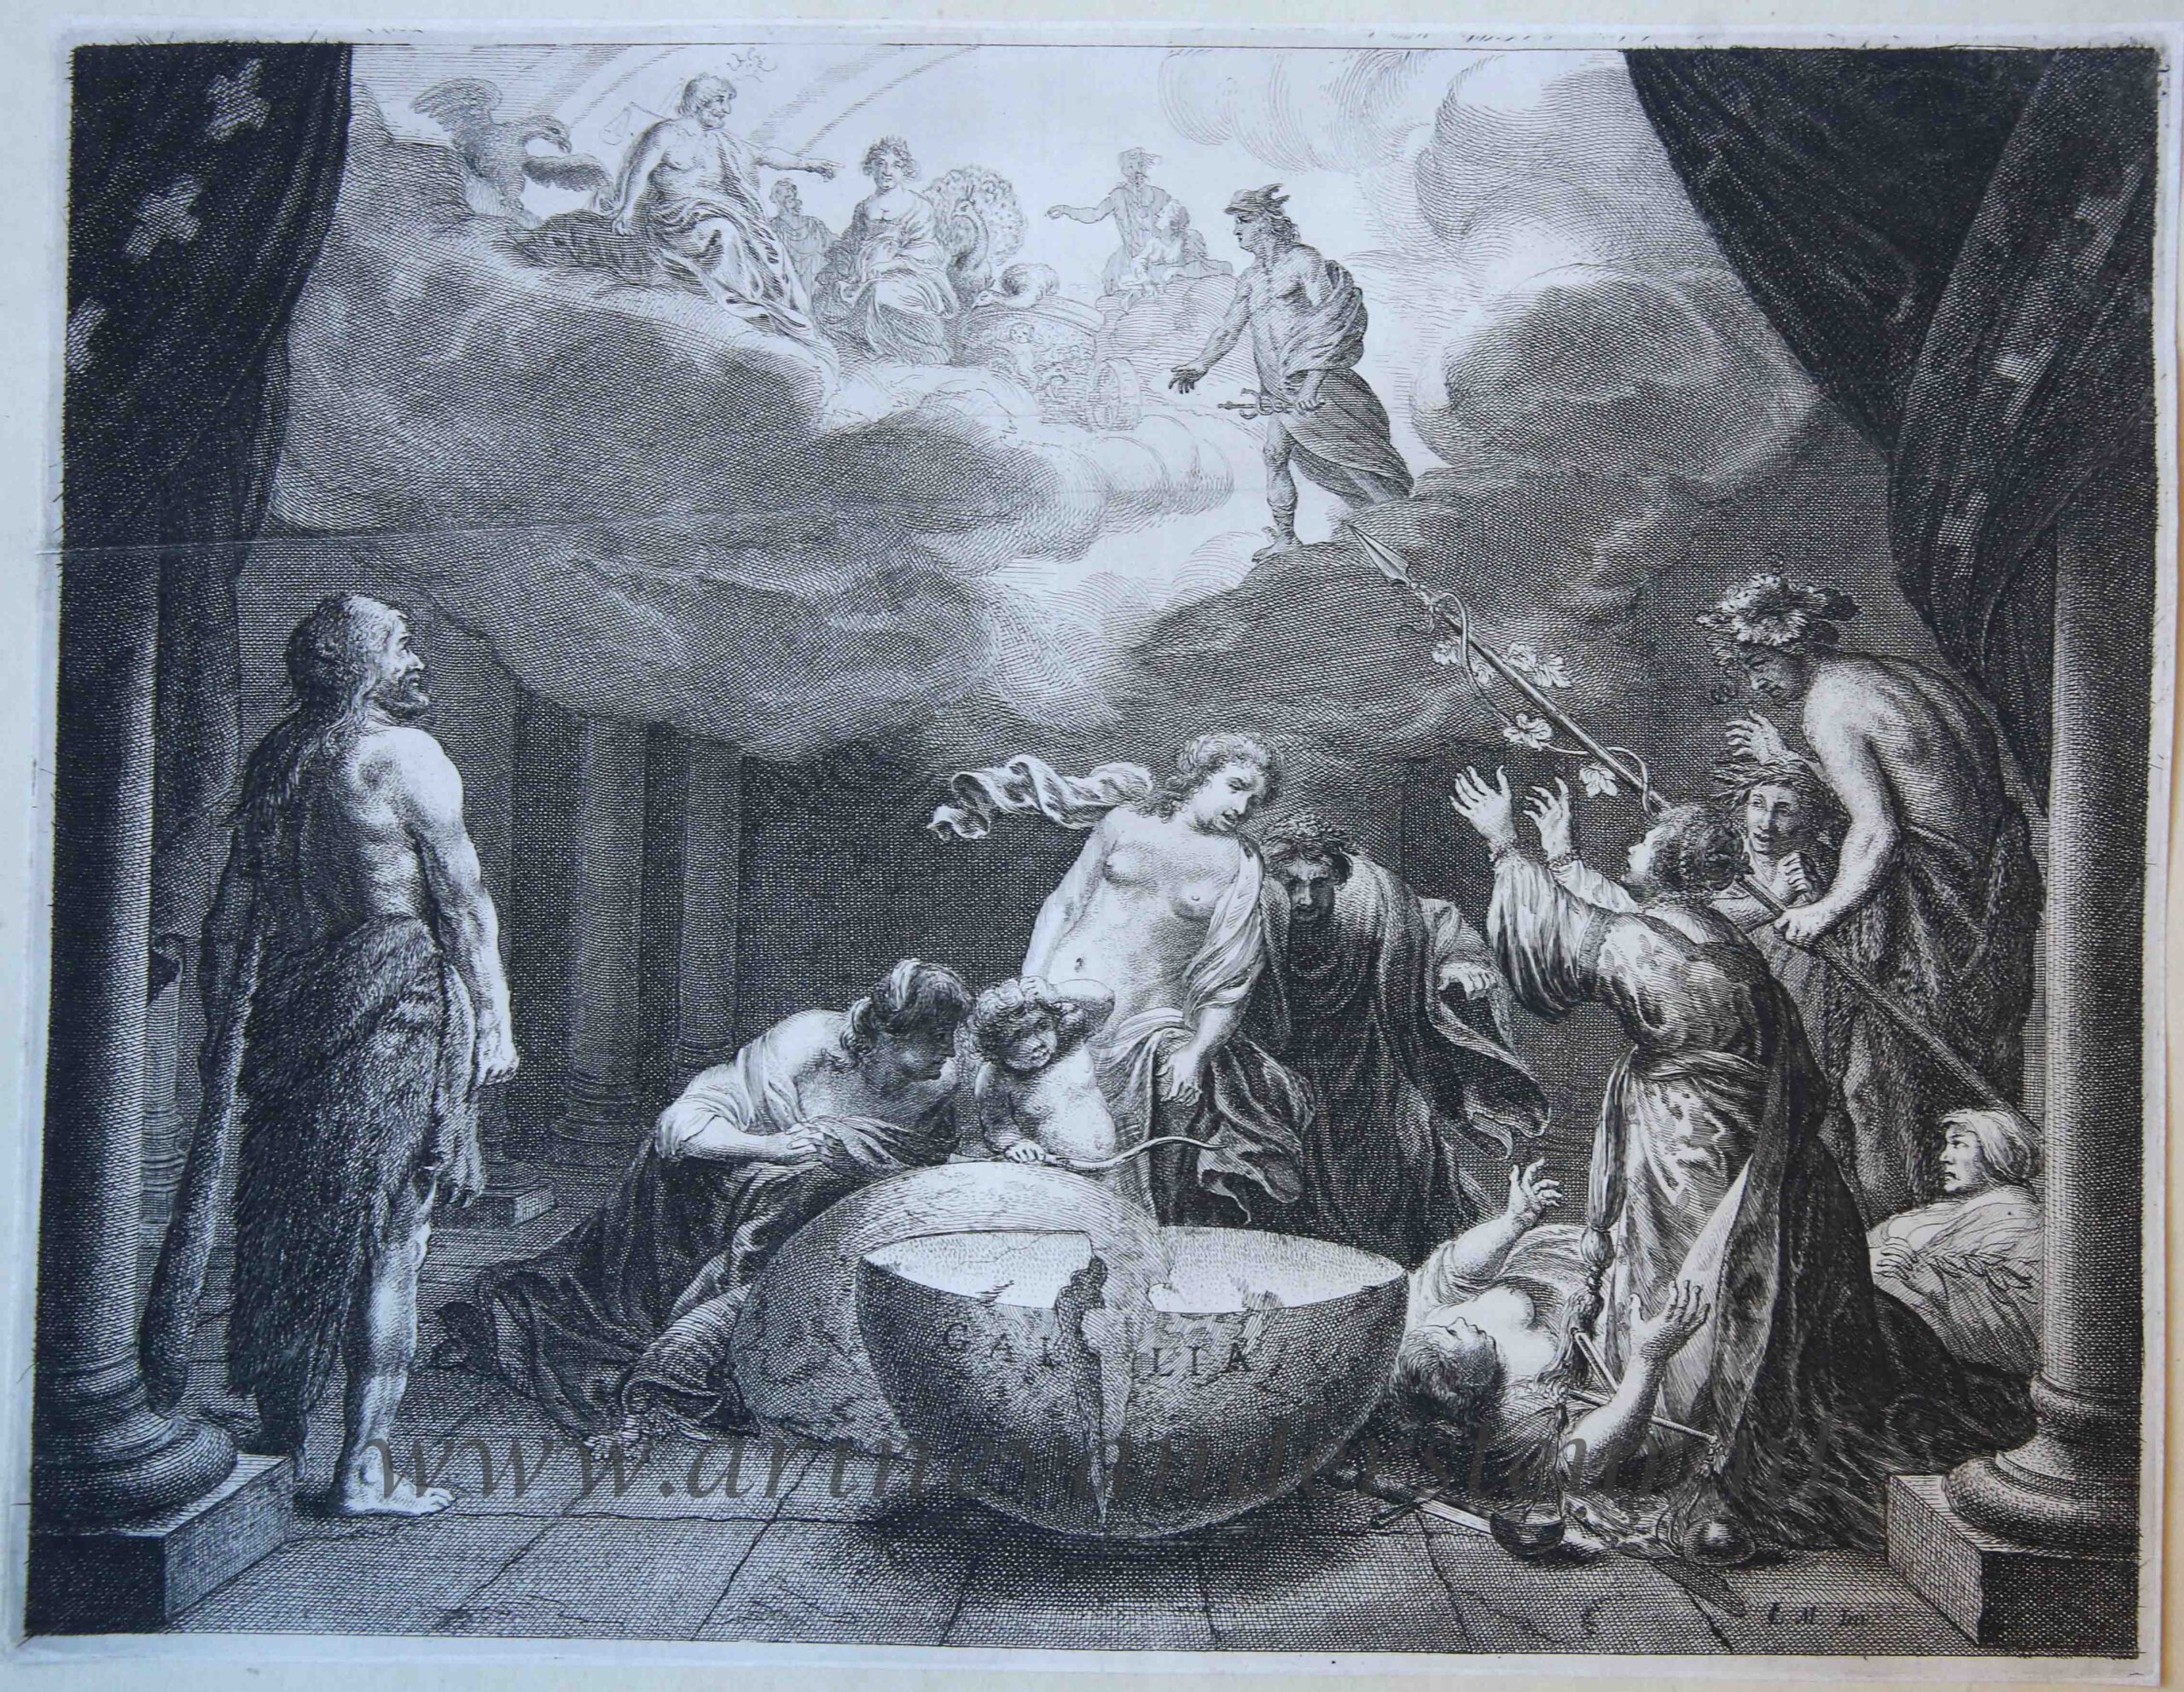 [Antique etching, allegory] French maiden begs the gods for help, image from the triumphal arch for Maria de' Medici, Amsterdam 1638, published 1639.